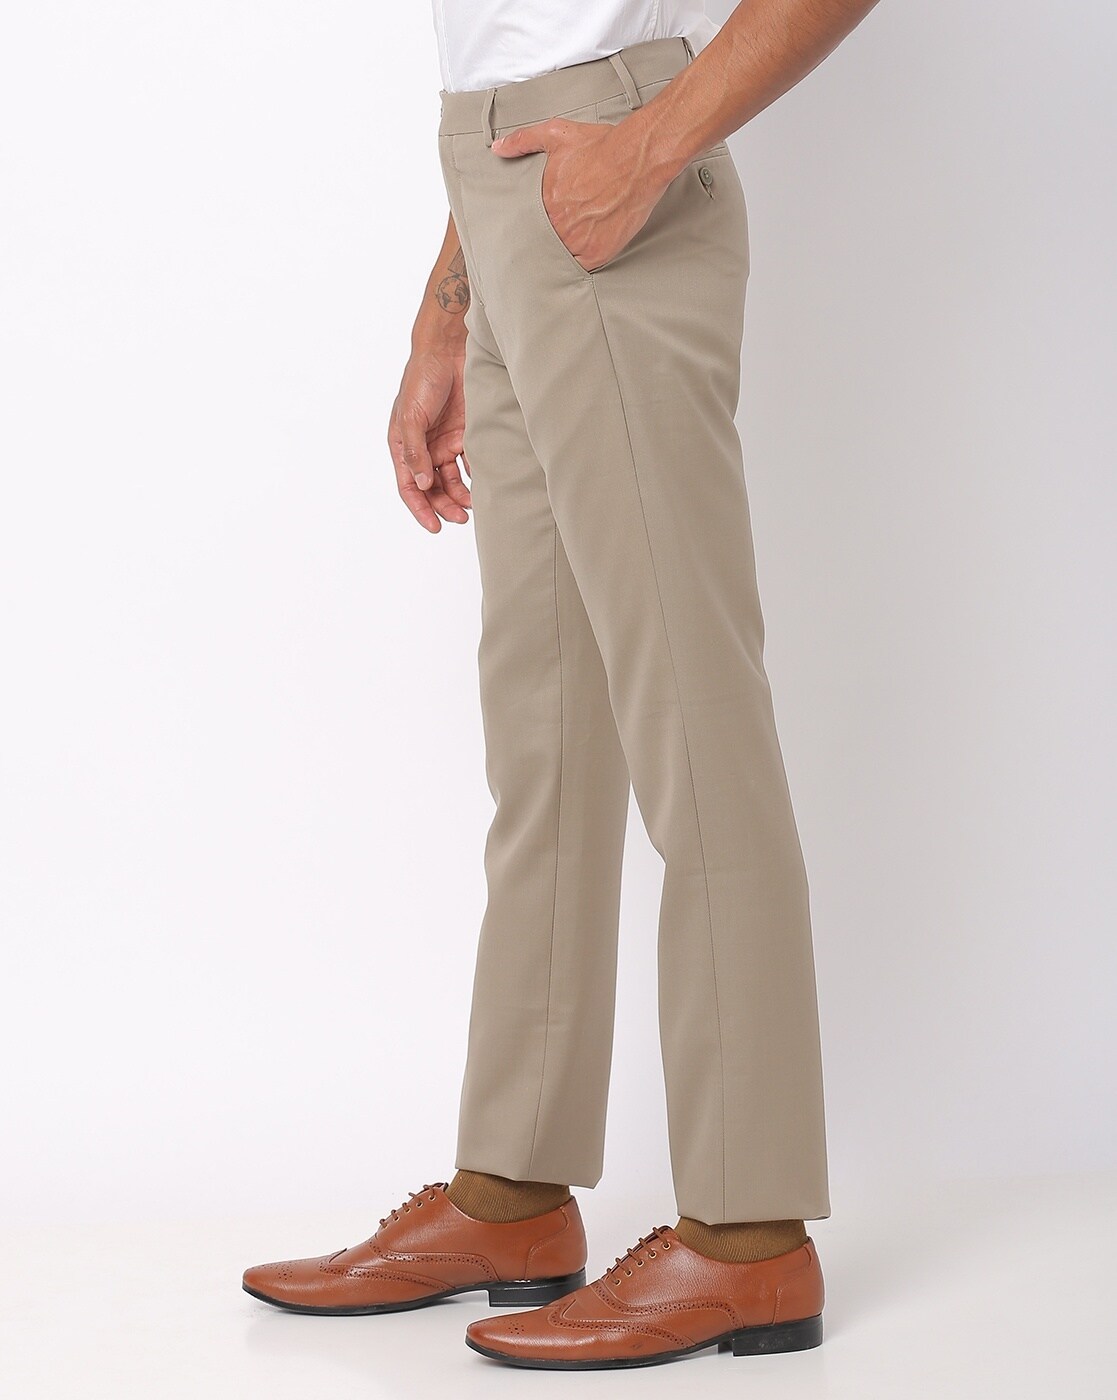 Buy Black Trousers  Pants for Men by ONLY VIMALAPPAREL Online  Ajiocom